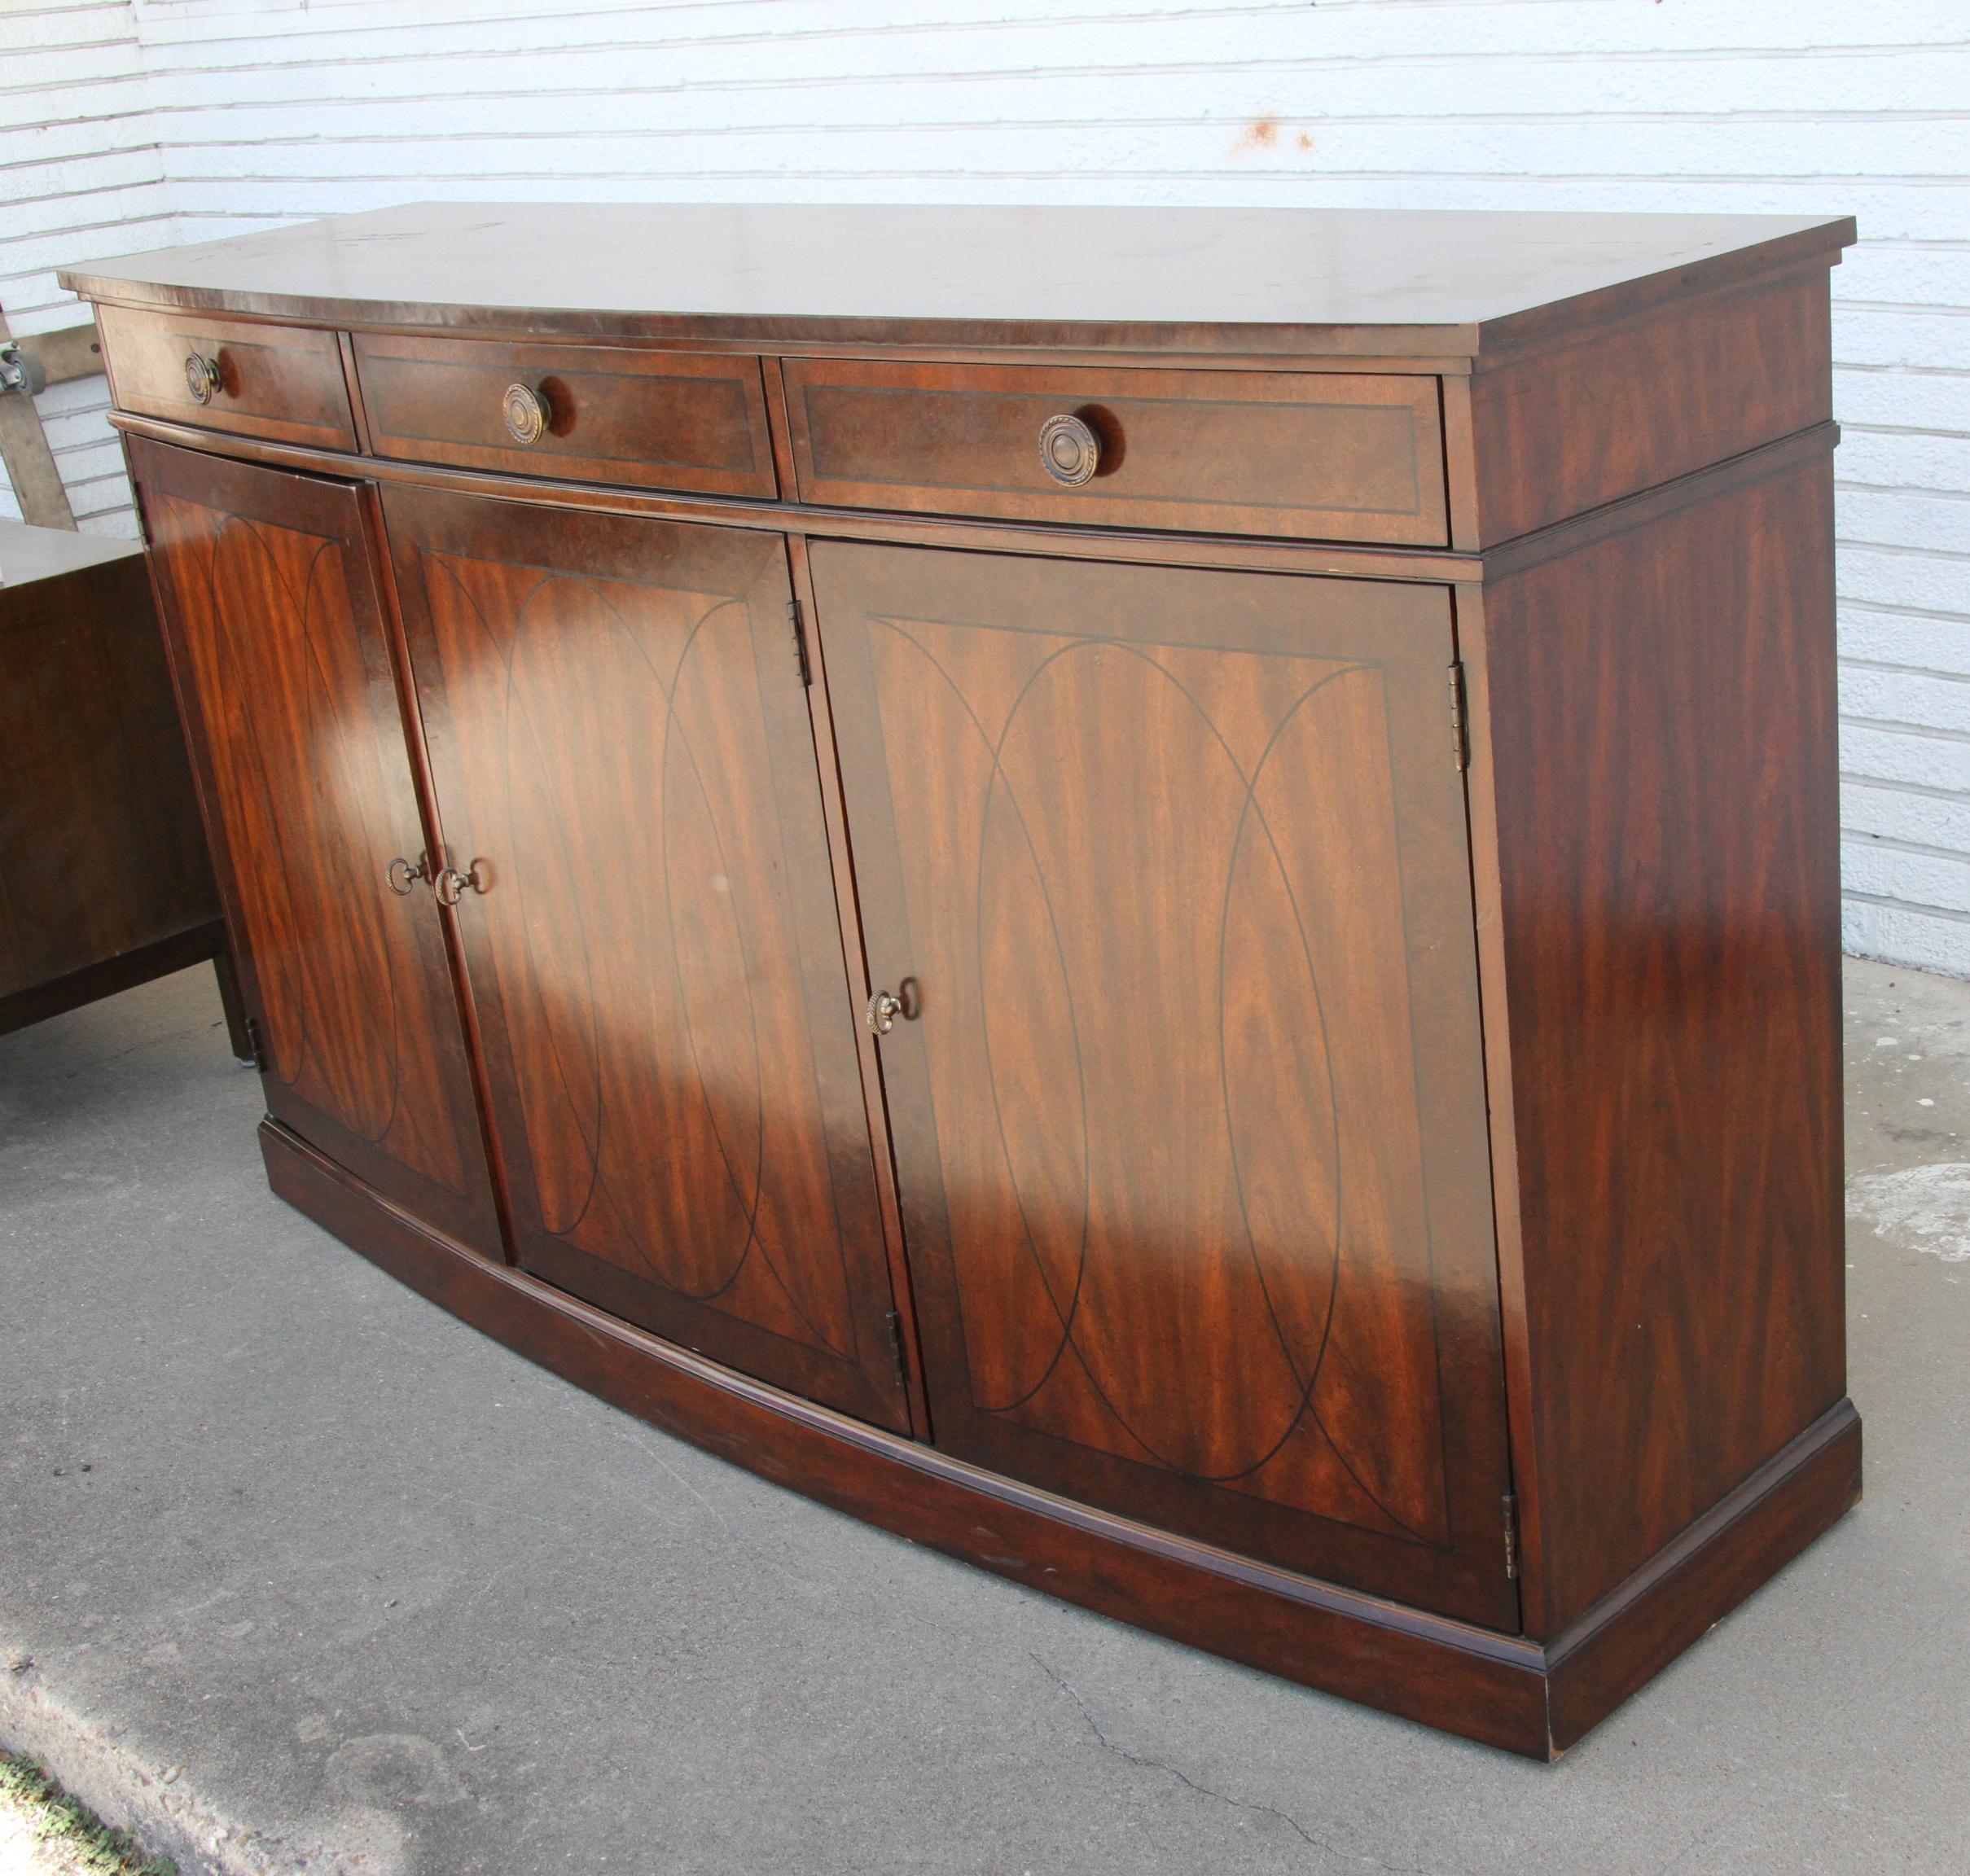 Georgian Style Sideboard  by Robb & Stucky, Circa 1980s 

3 door with shelving and book-matched mahogany, decorative inlay and original brass hardware.

Measures: 70”W x19